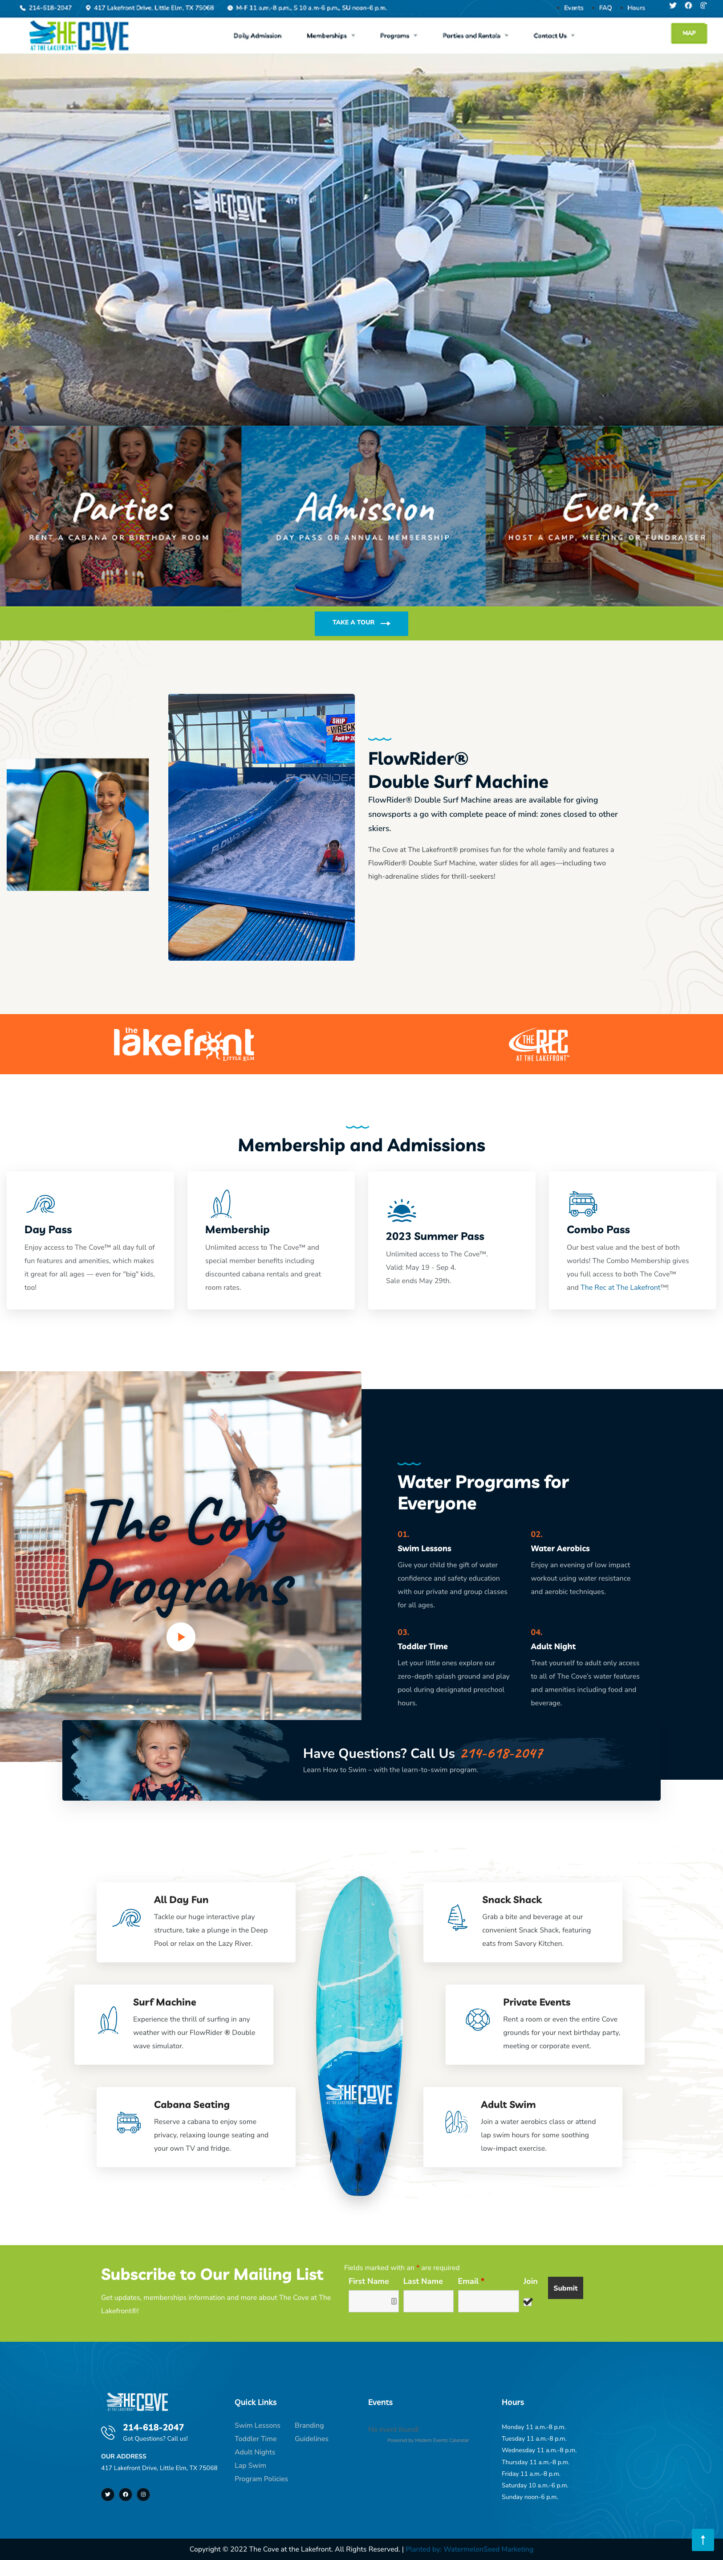 A website design featuring The Cove at the Lakefront with a blue and orange color scheme.